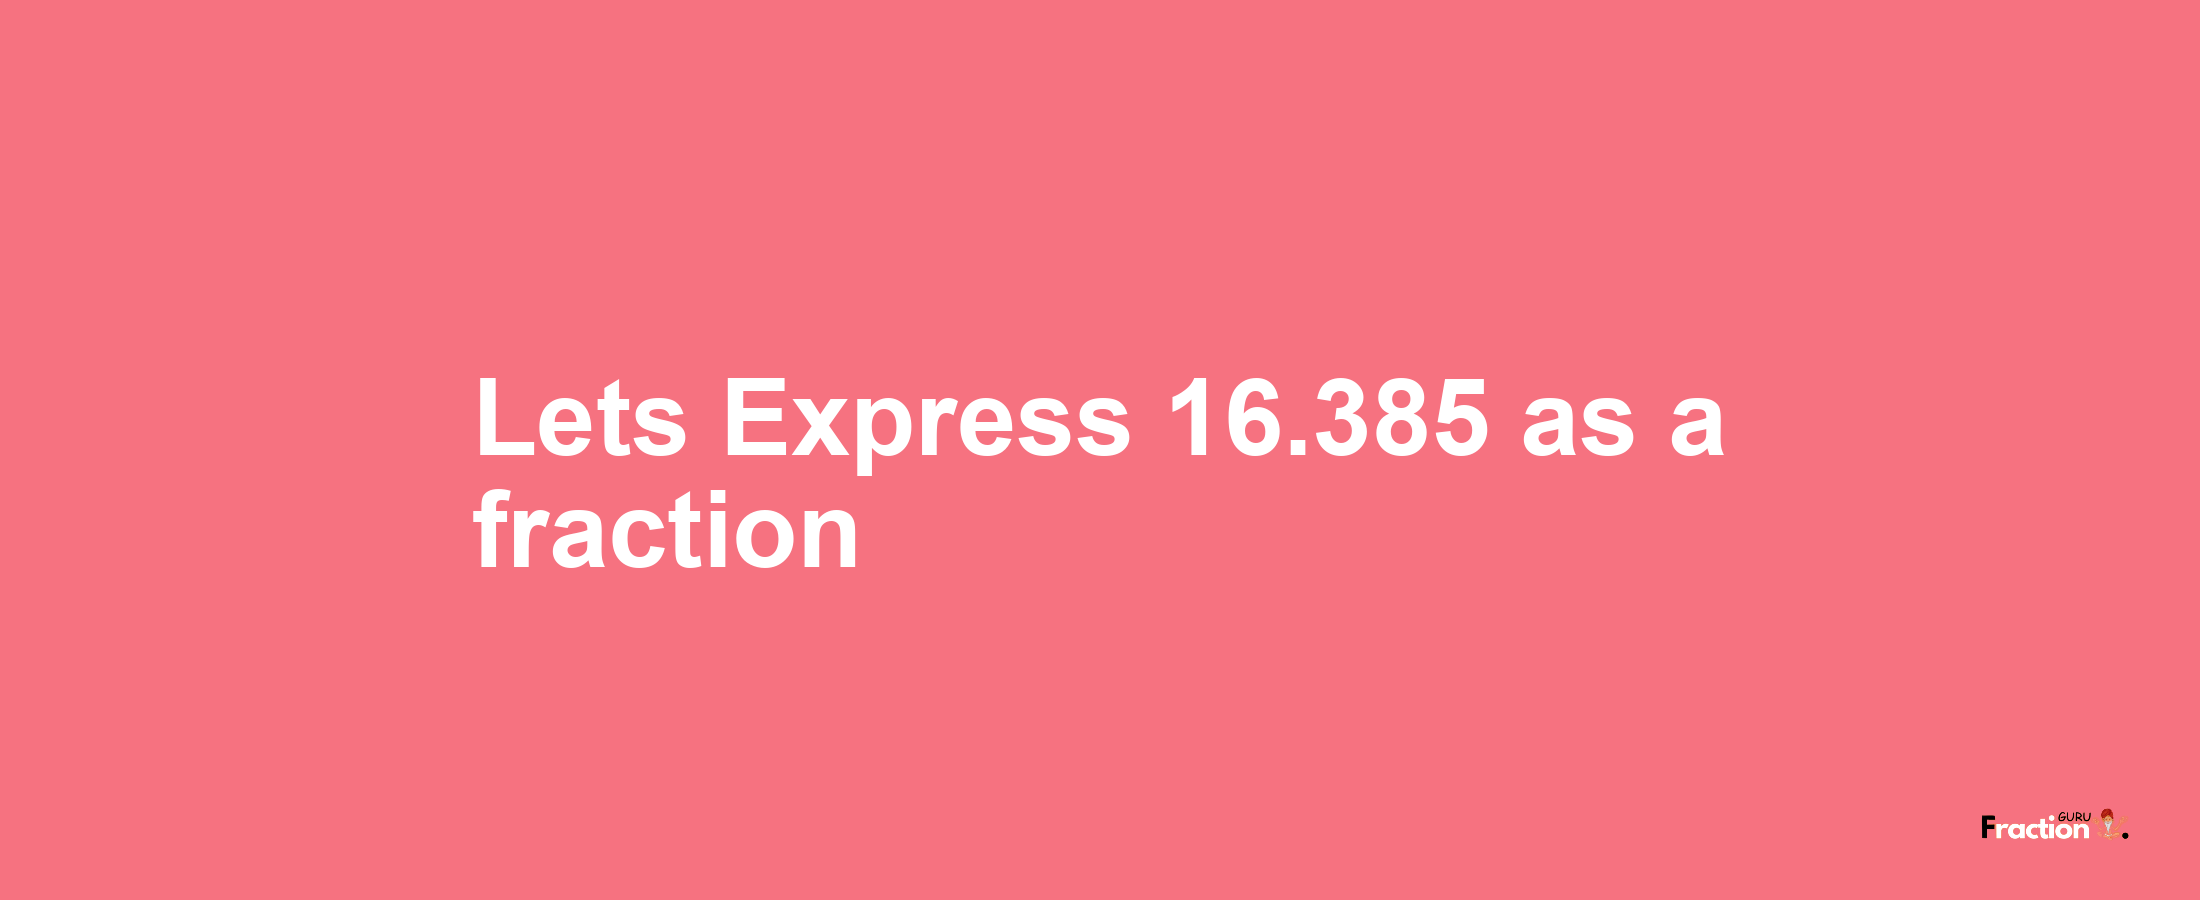 Lets Express 16.385 as afraction